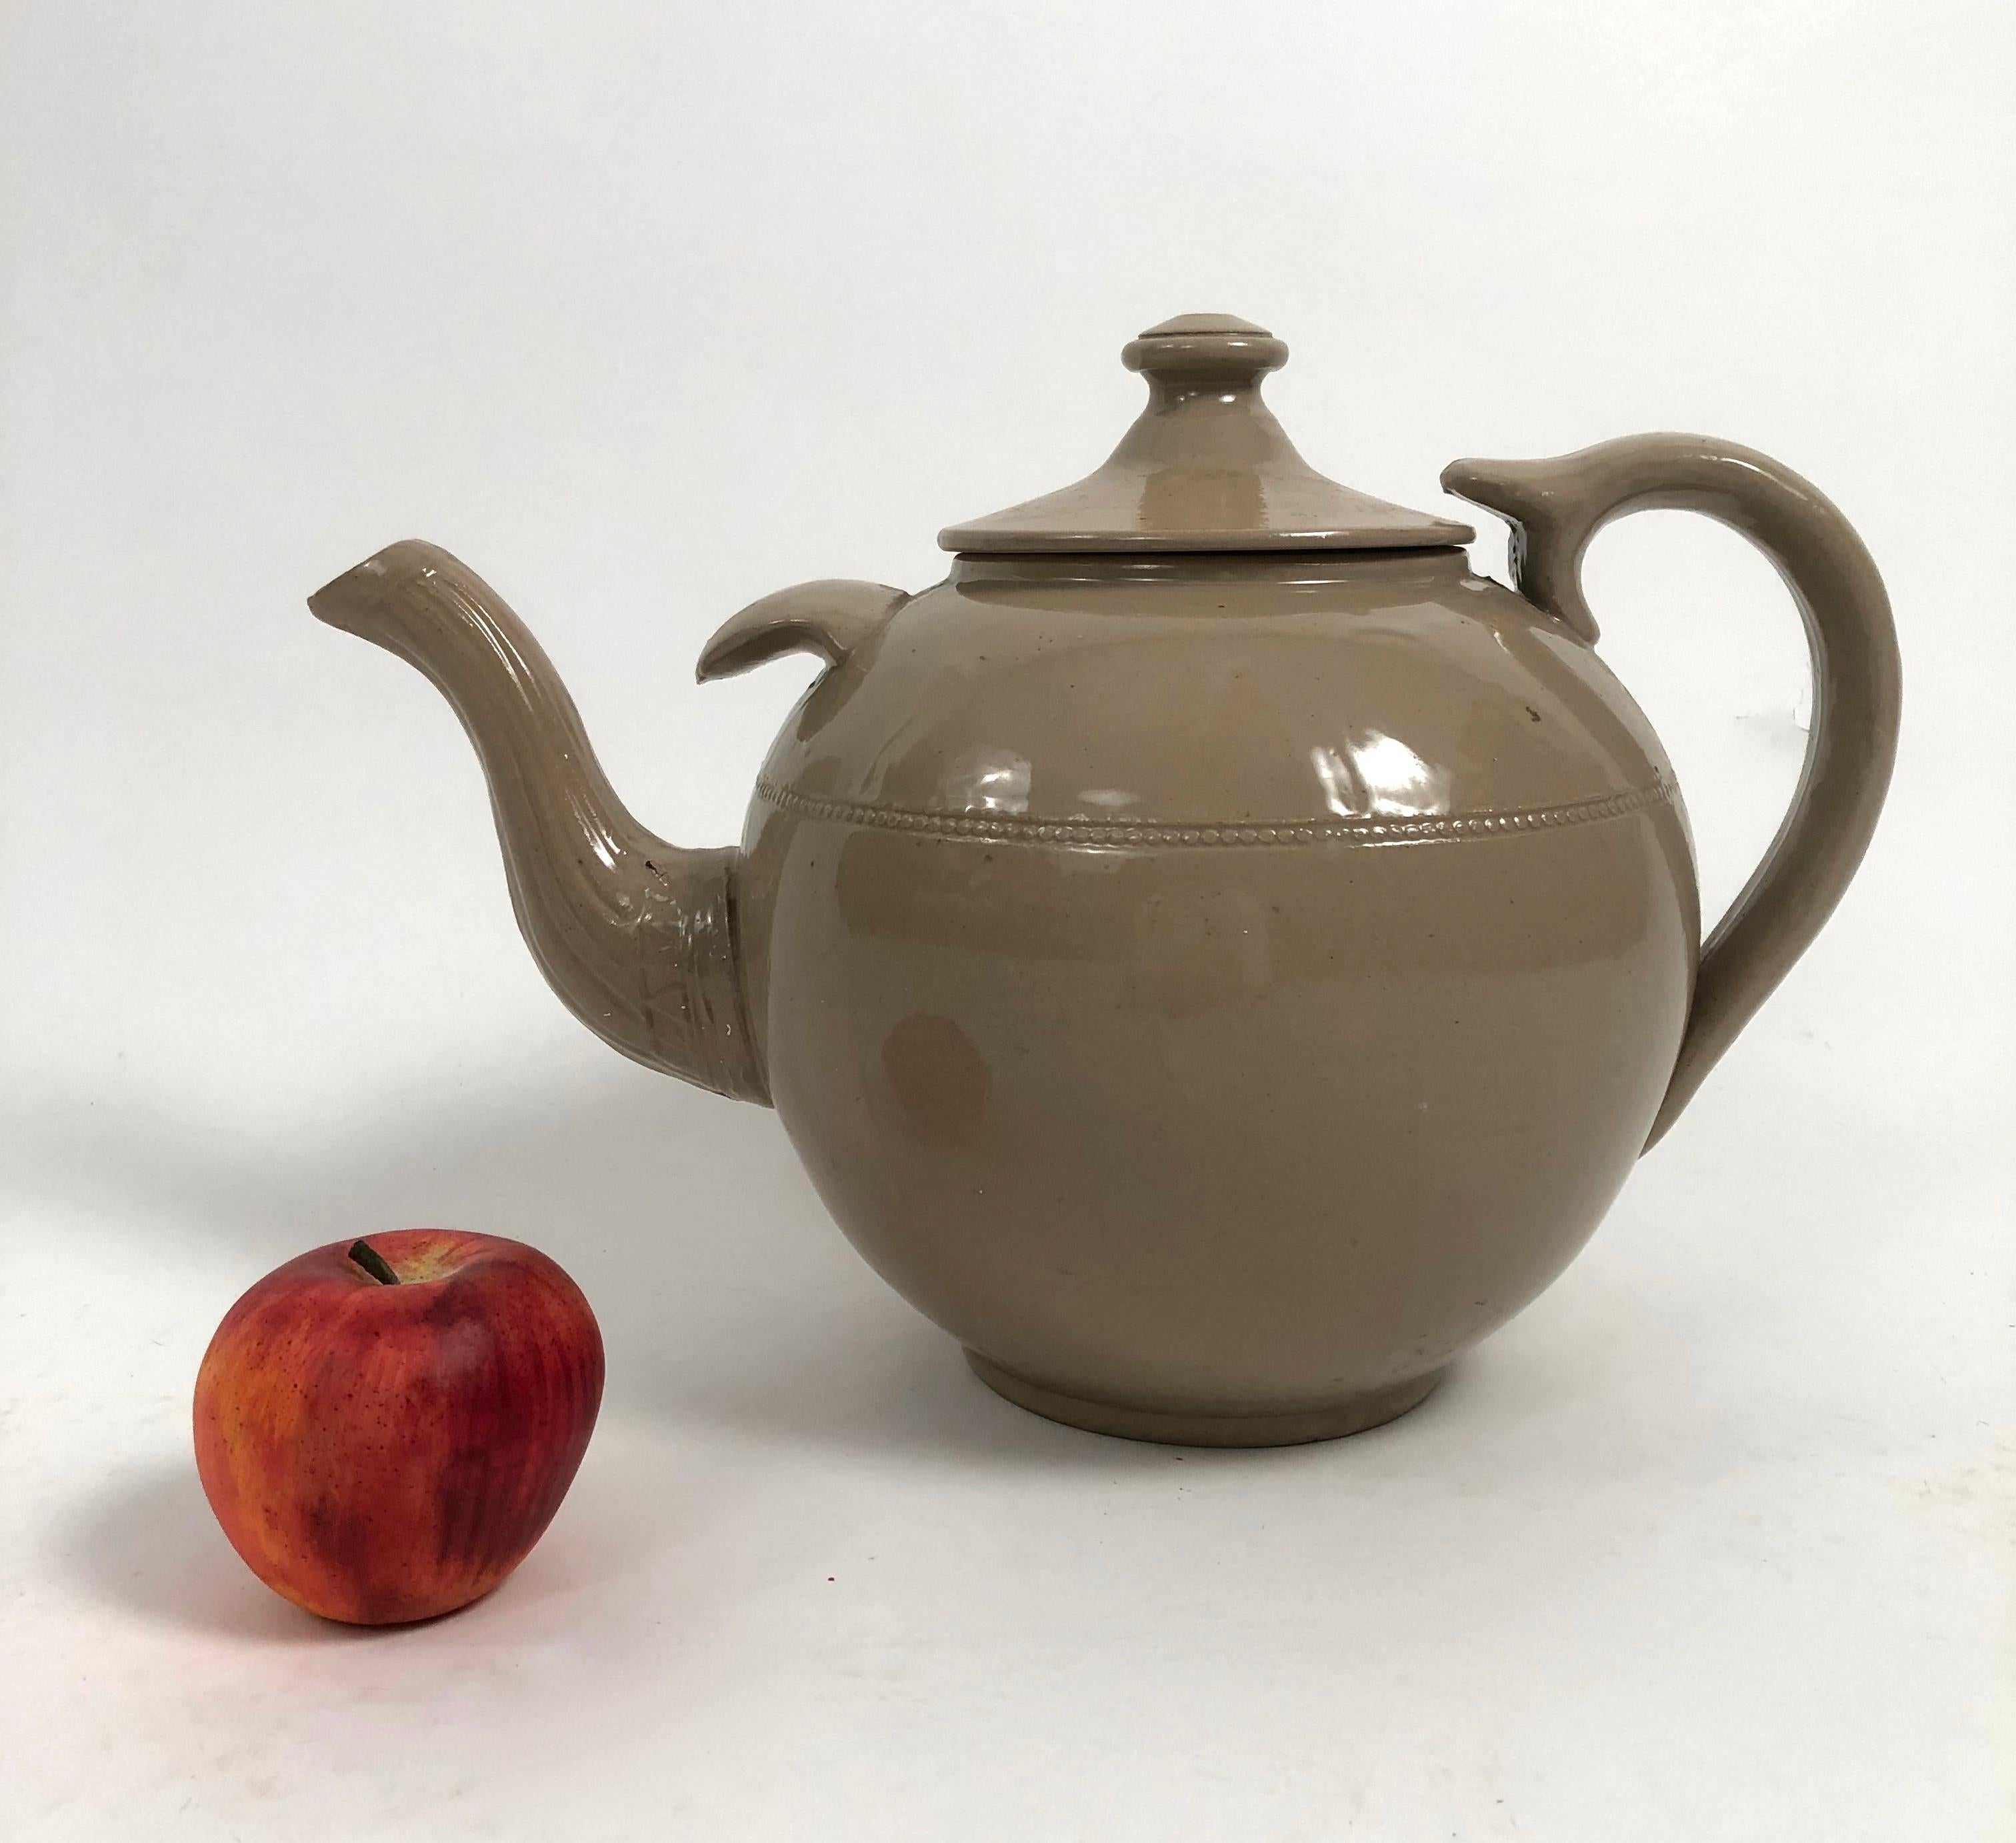 A 19th century giant English Staffordshire pottery drabware teapot of typical globular form with notch above the spout for added stability when pouring, decorated with impressed geometric decoration on the spout and with a string of pearls band